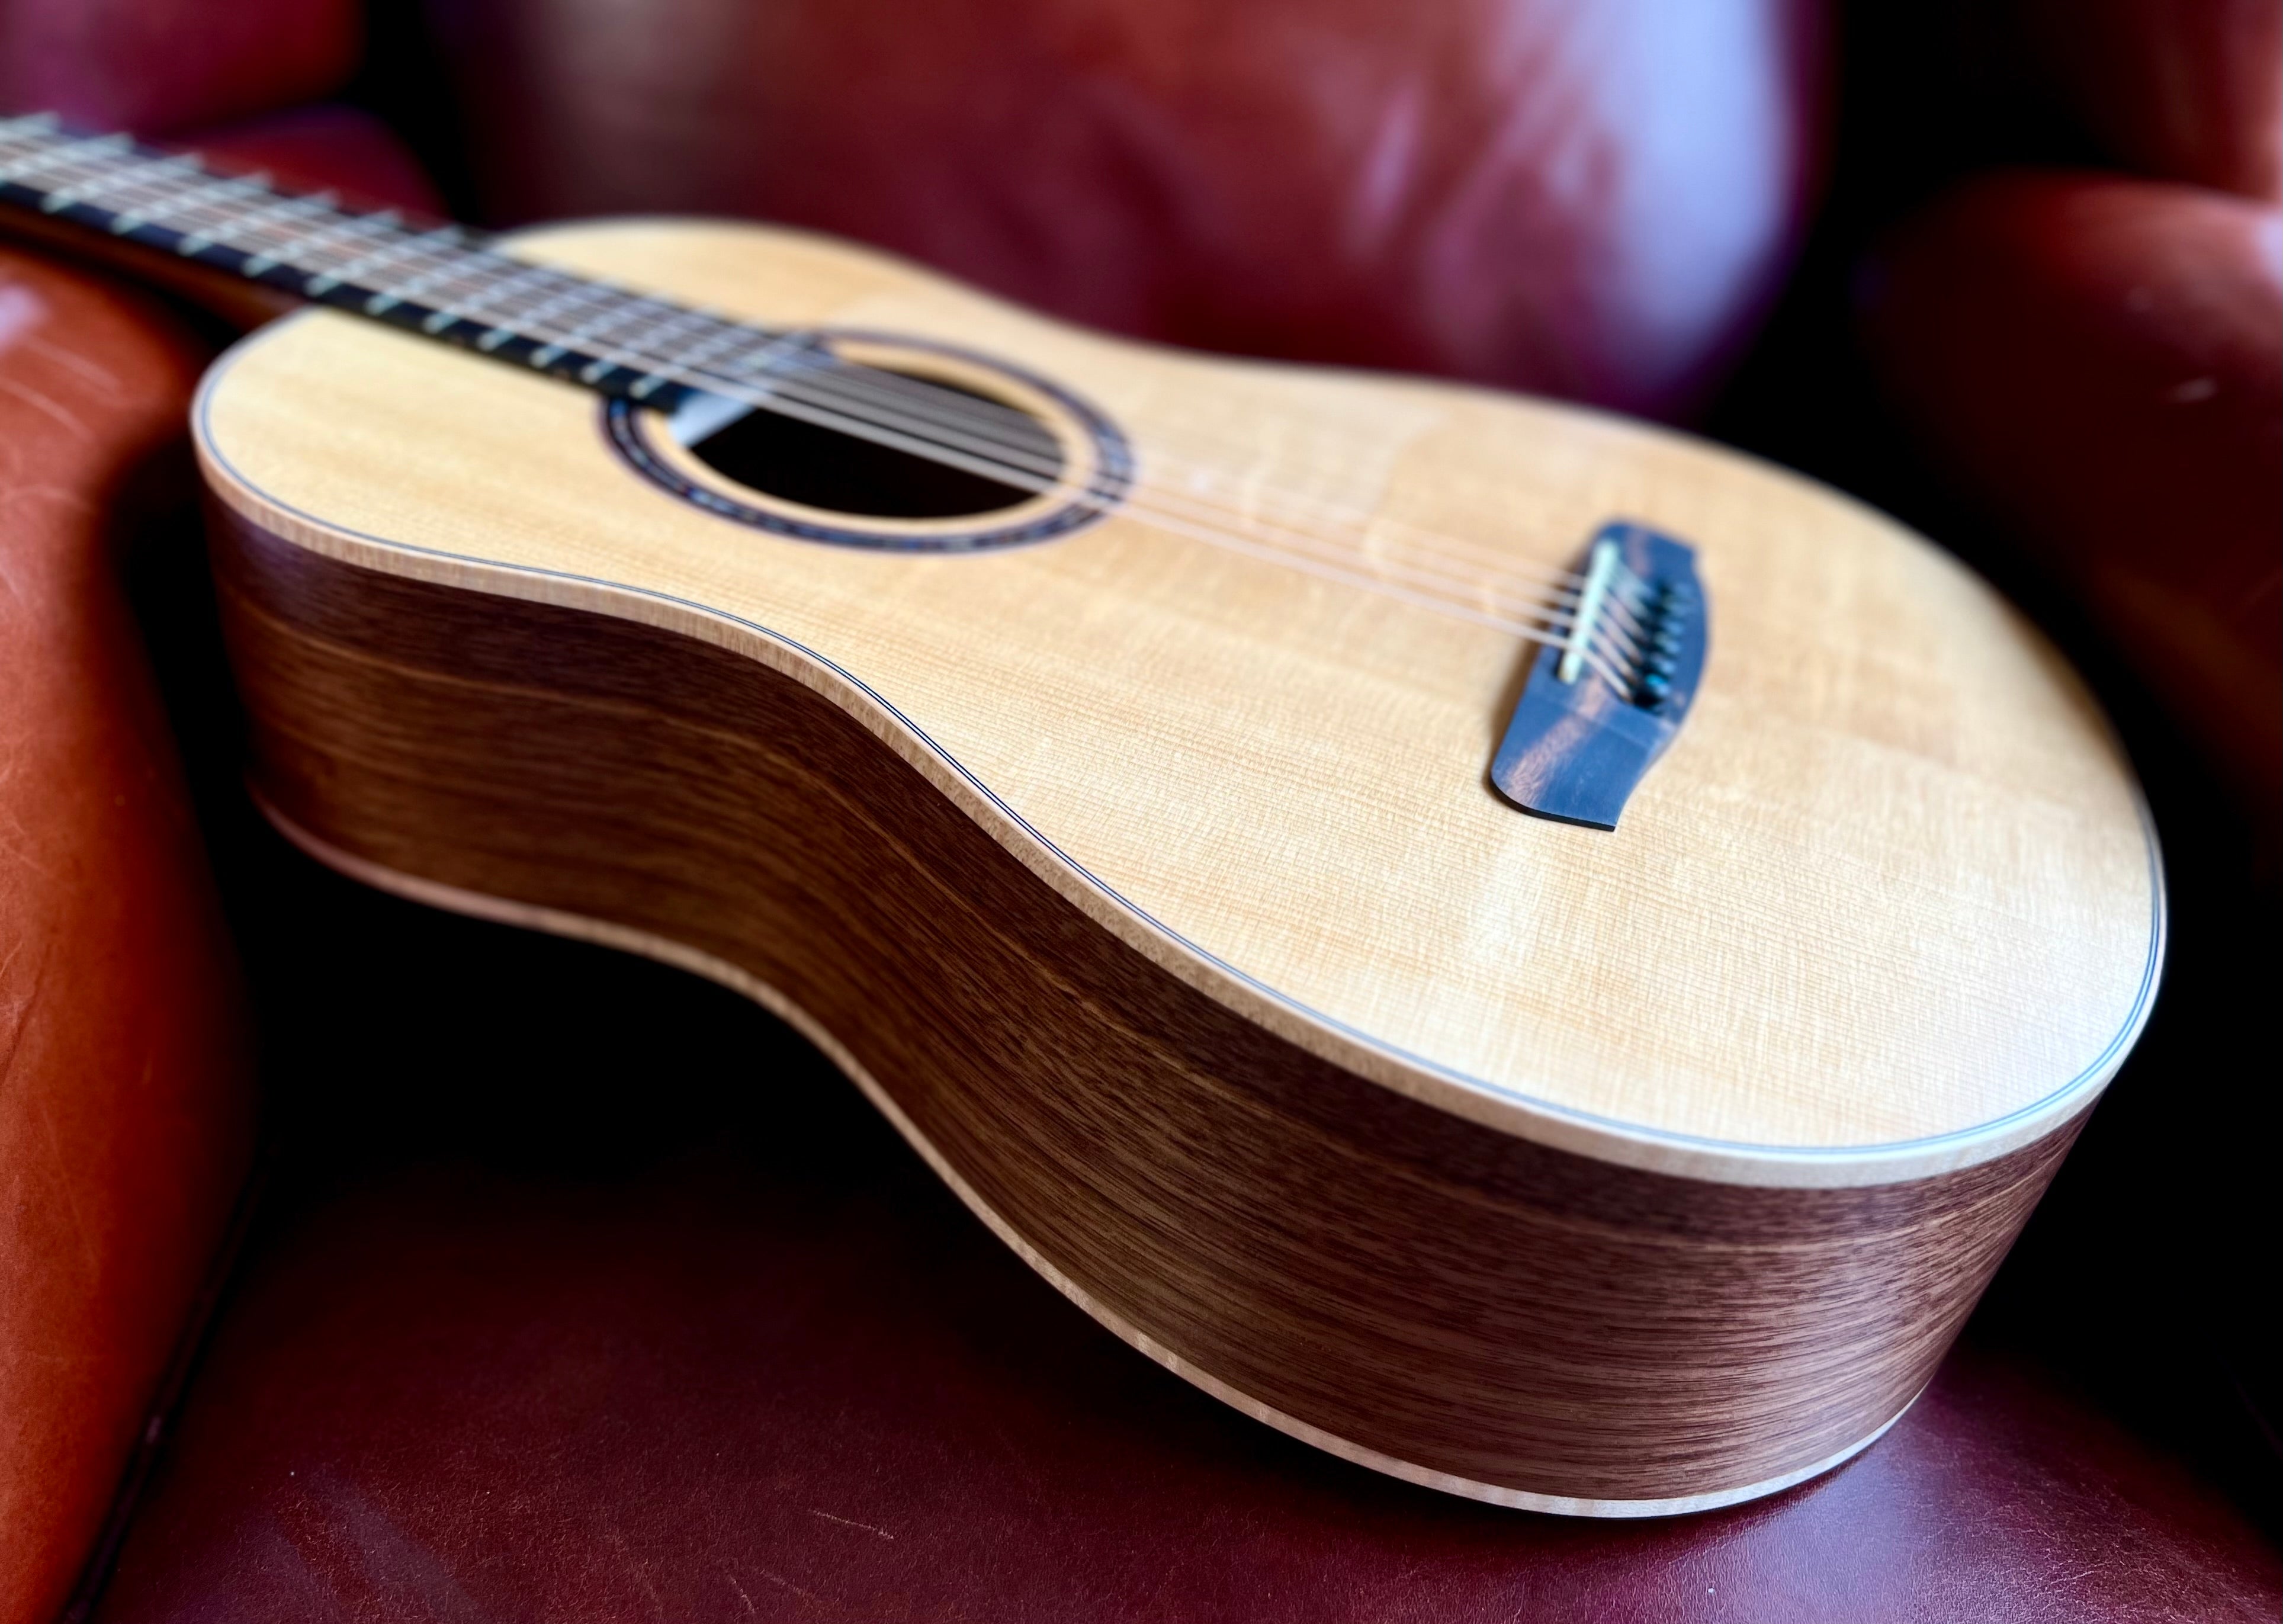 Dowina Walnut BV Deluxe Torrified Swiss Moon Spruce, Acoustic Guitar for sale at Richards Guitars.